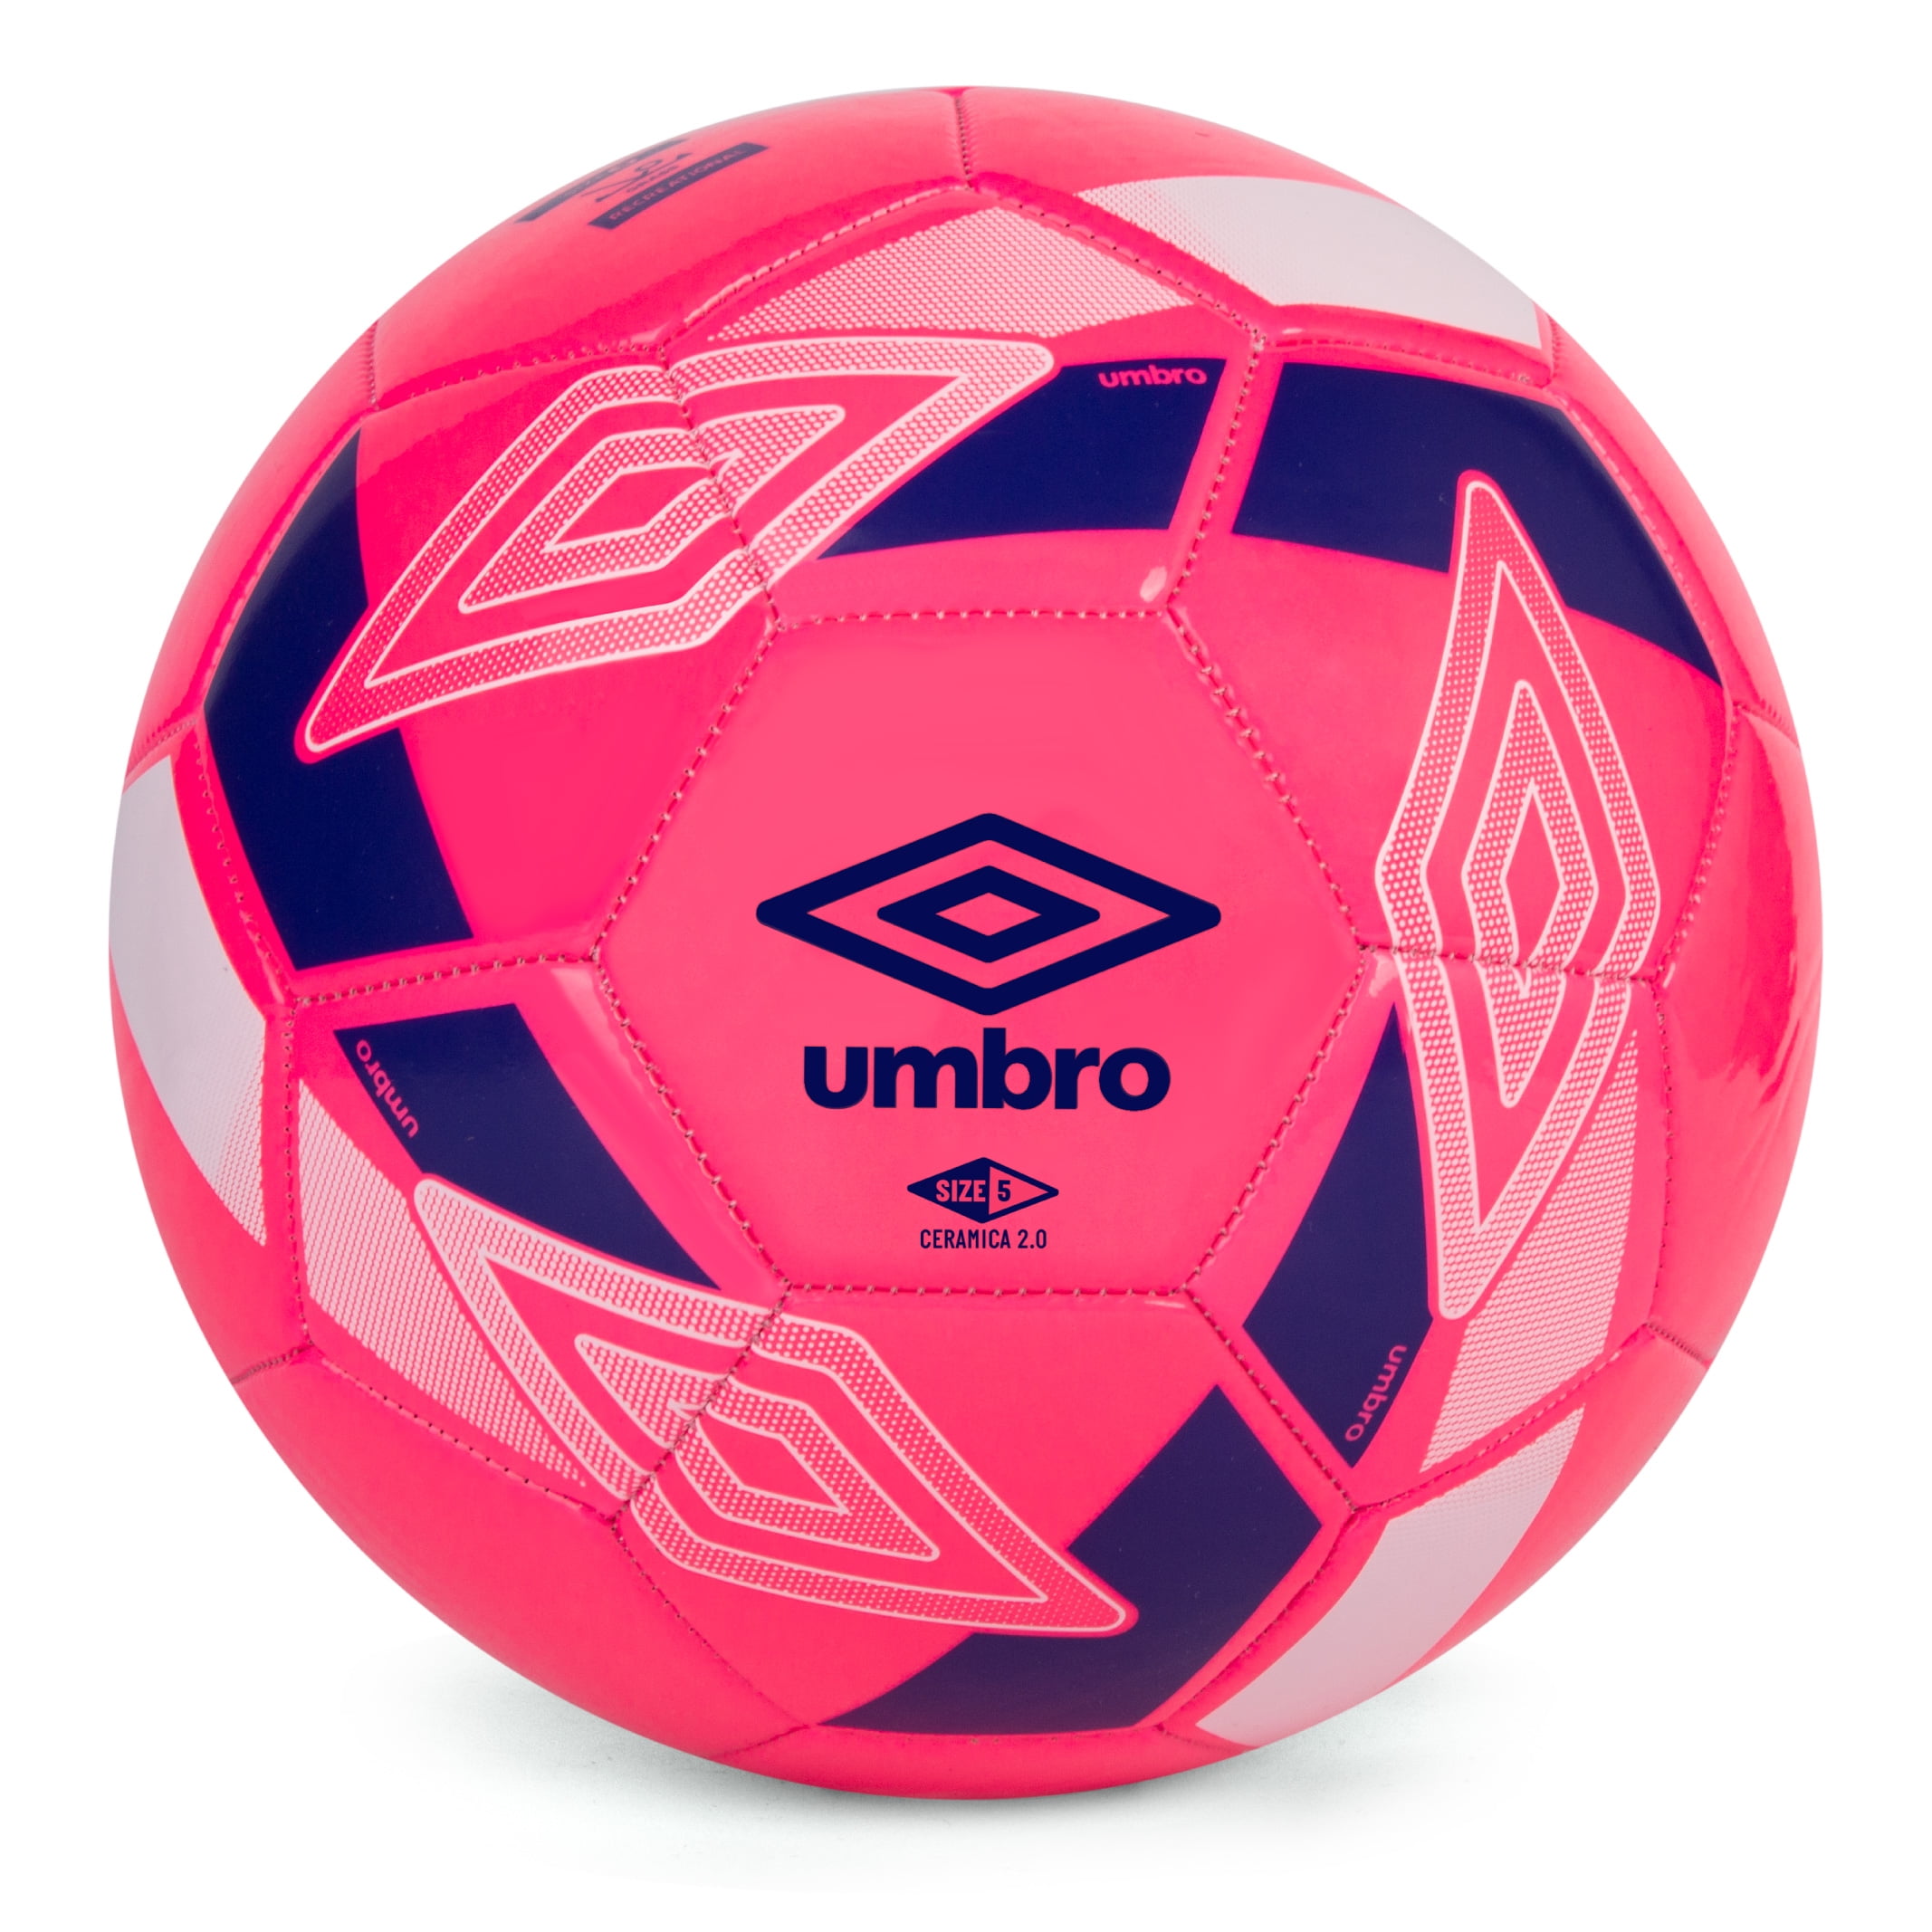 Umbro Neo Trainer Youth & Adult Soccer Ball Color & Size Options 